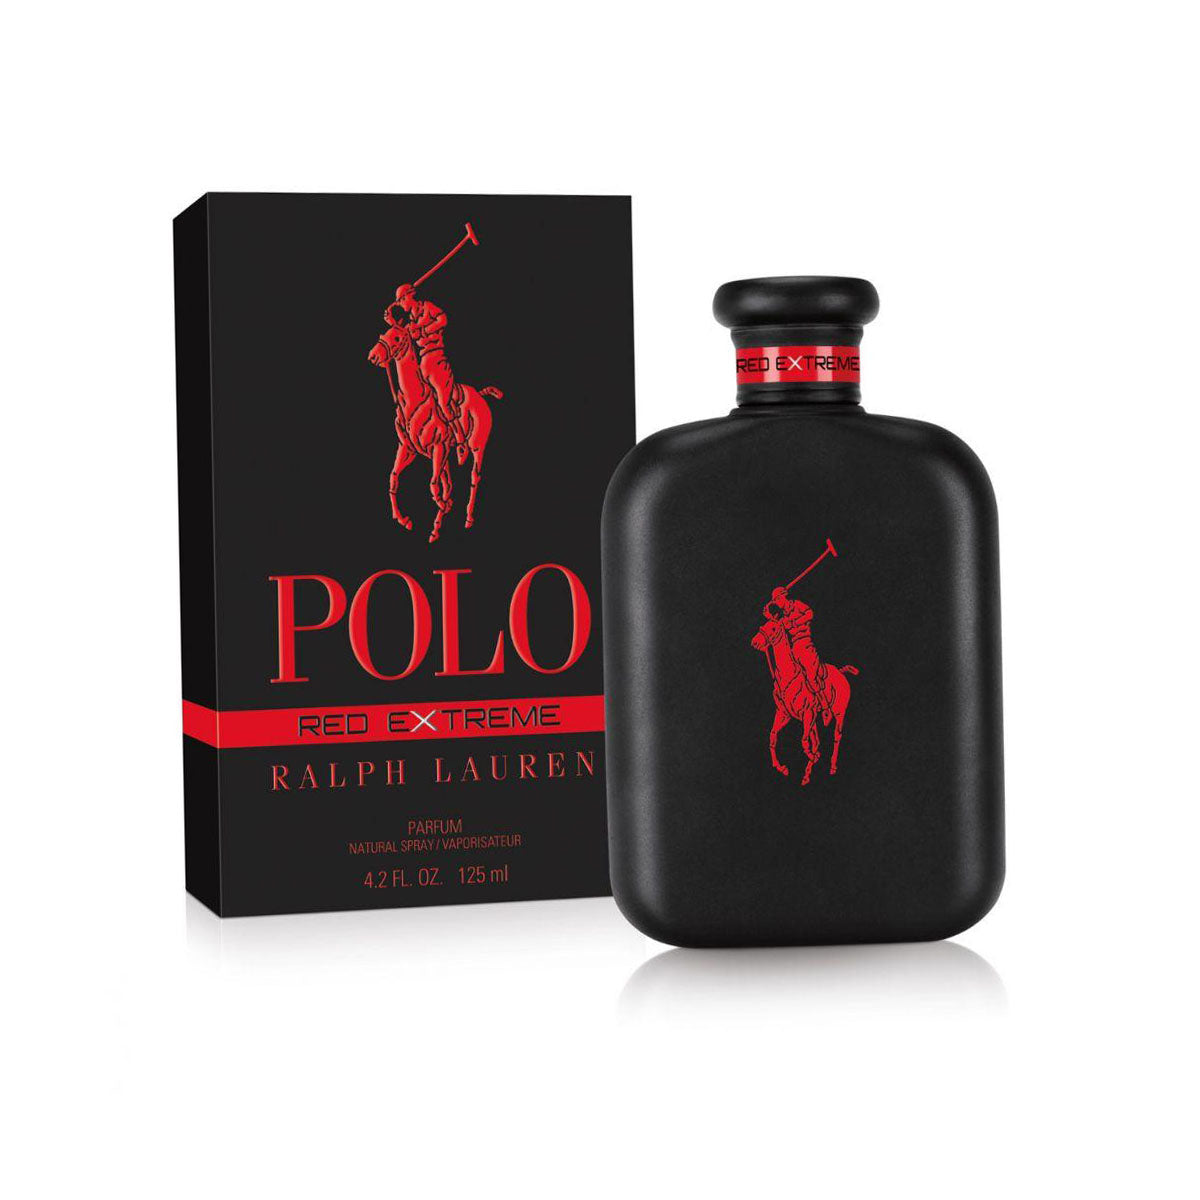 Polo Red Extreme 40ML EDP Hombre Ralph Lauren